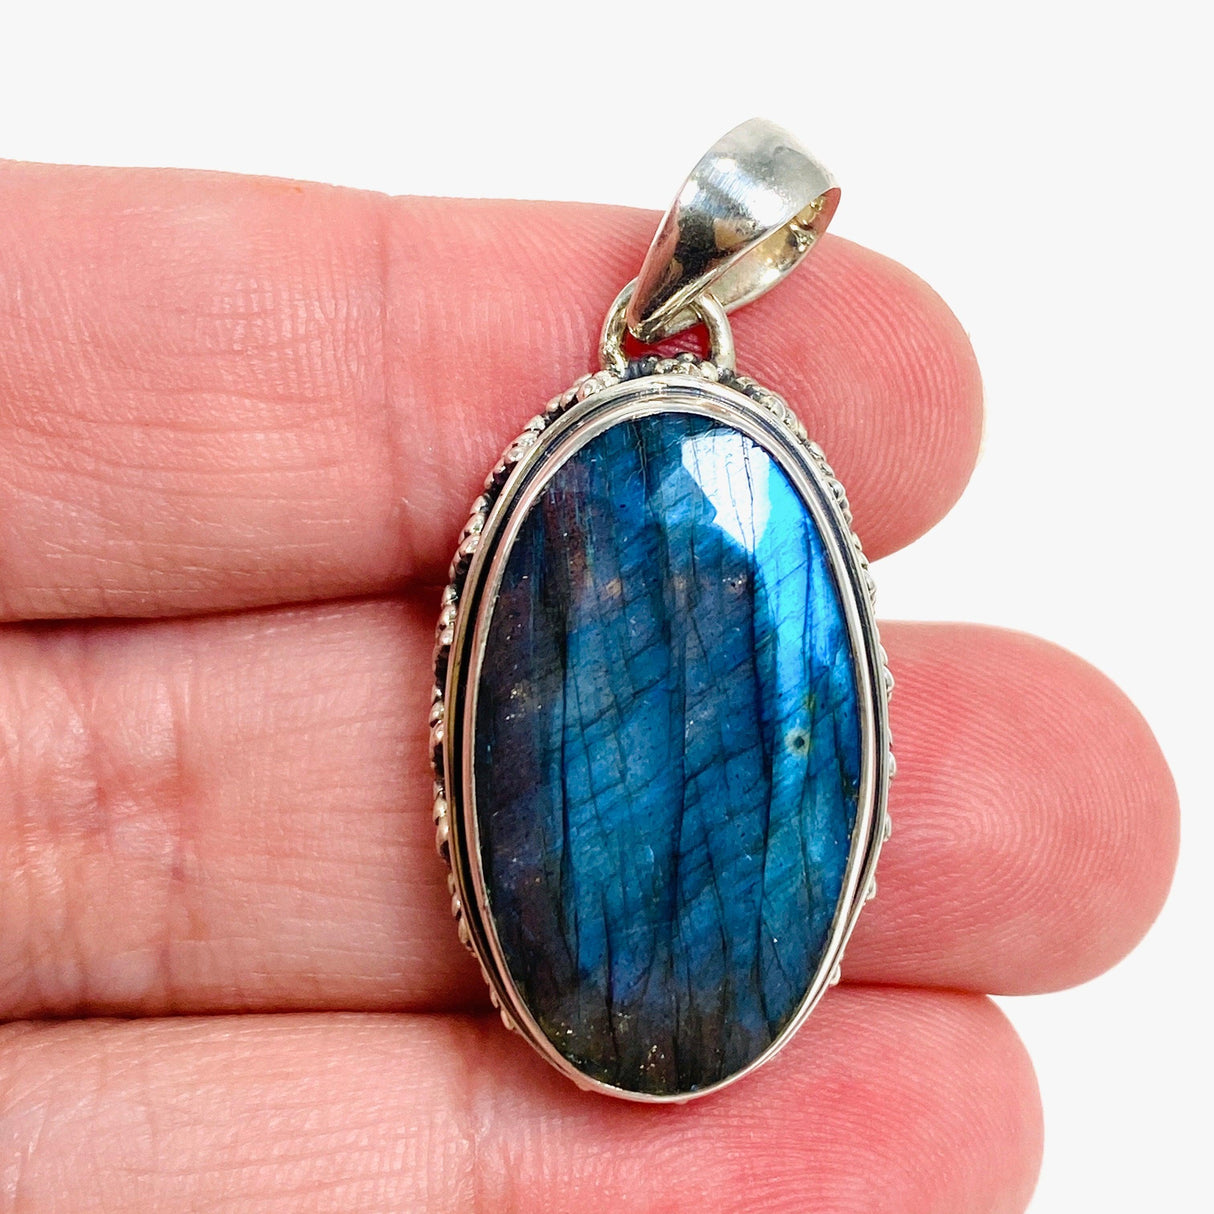 Blue iridescent Labradorite faceted gemstone pendant set in silver on a hand